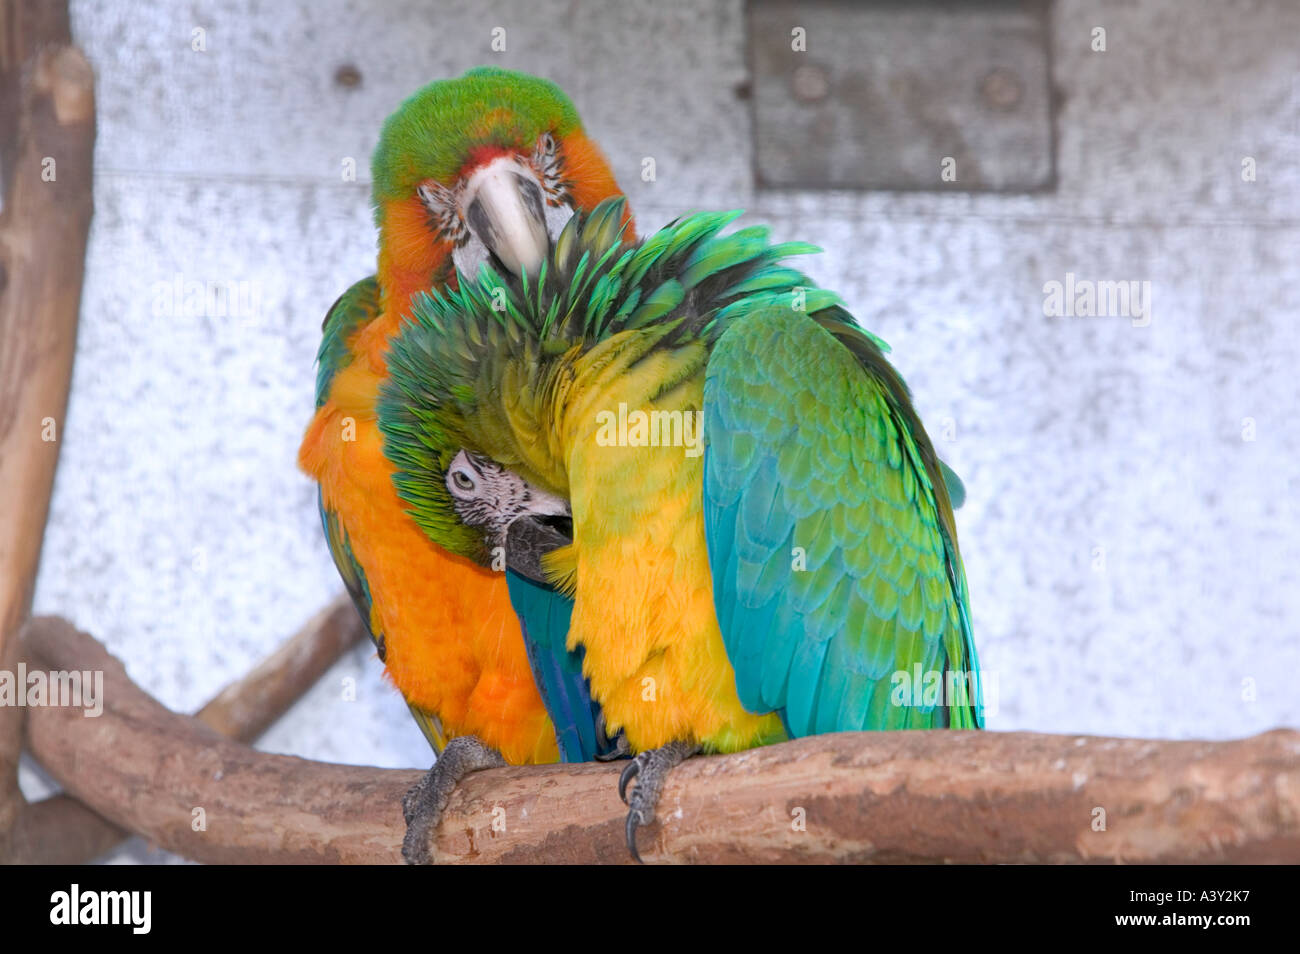 a pair of parrots grooming each other Stock Photo